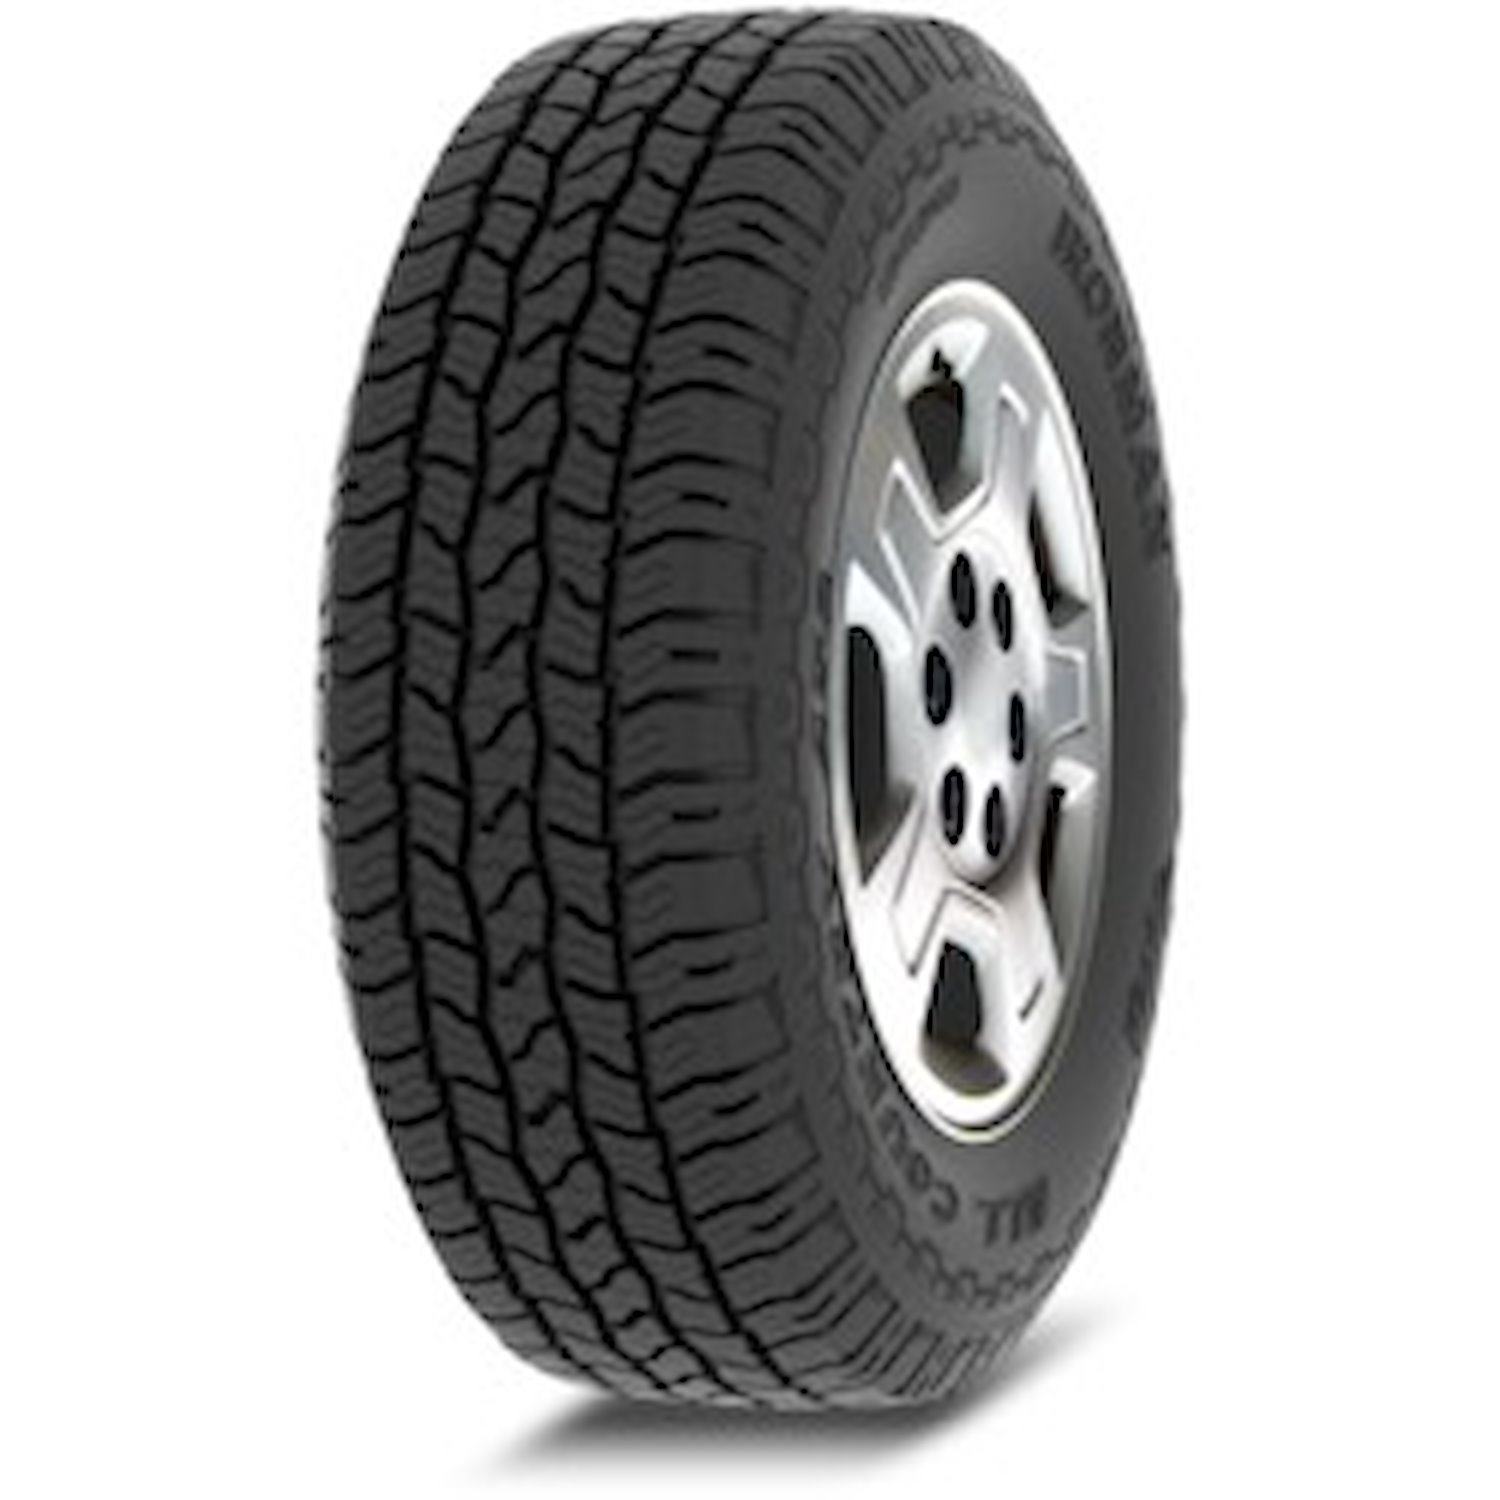 07710 All Country AT2 Tire, LT265/60R20, 121/118R